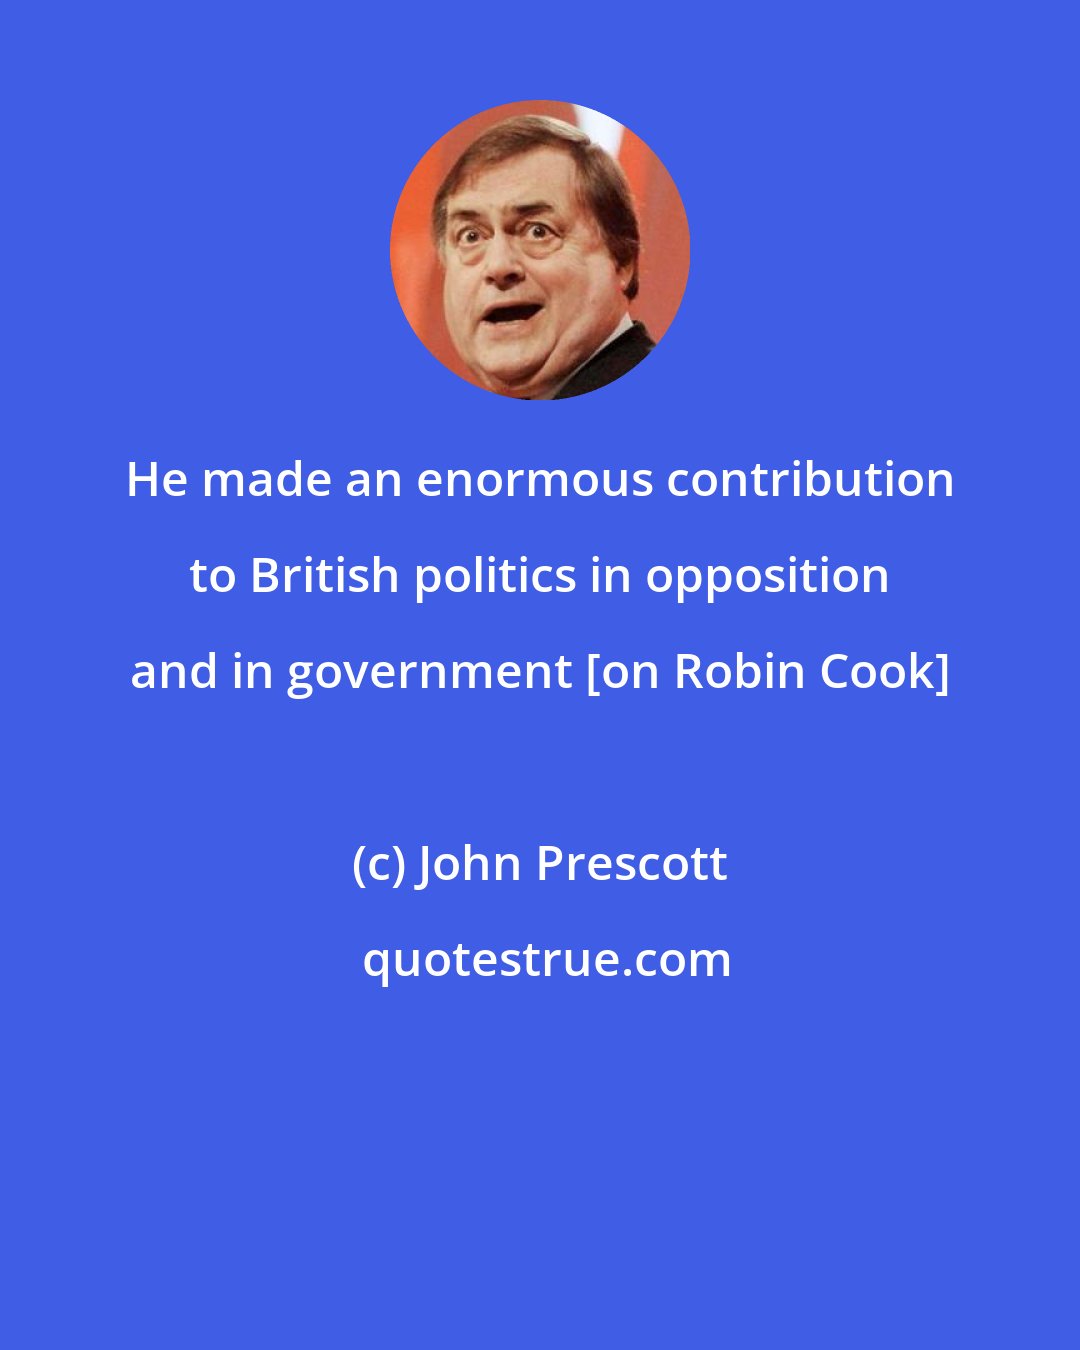 John Prescott: He made an enormous contribution to British politics in opposition and in government [on Robin Cook]